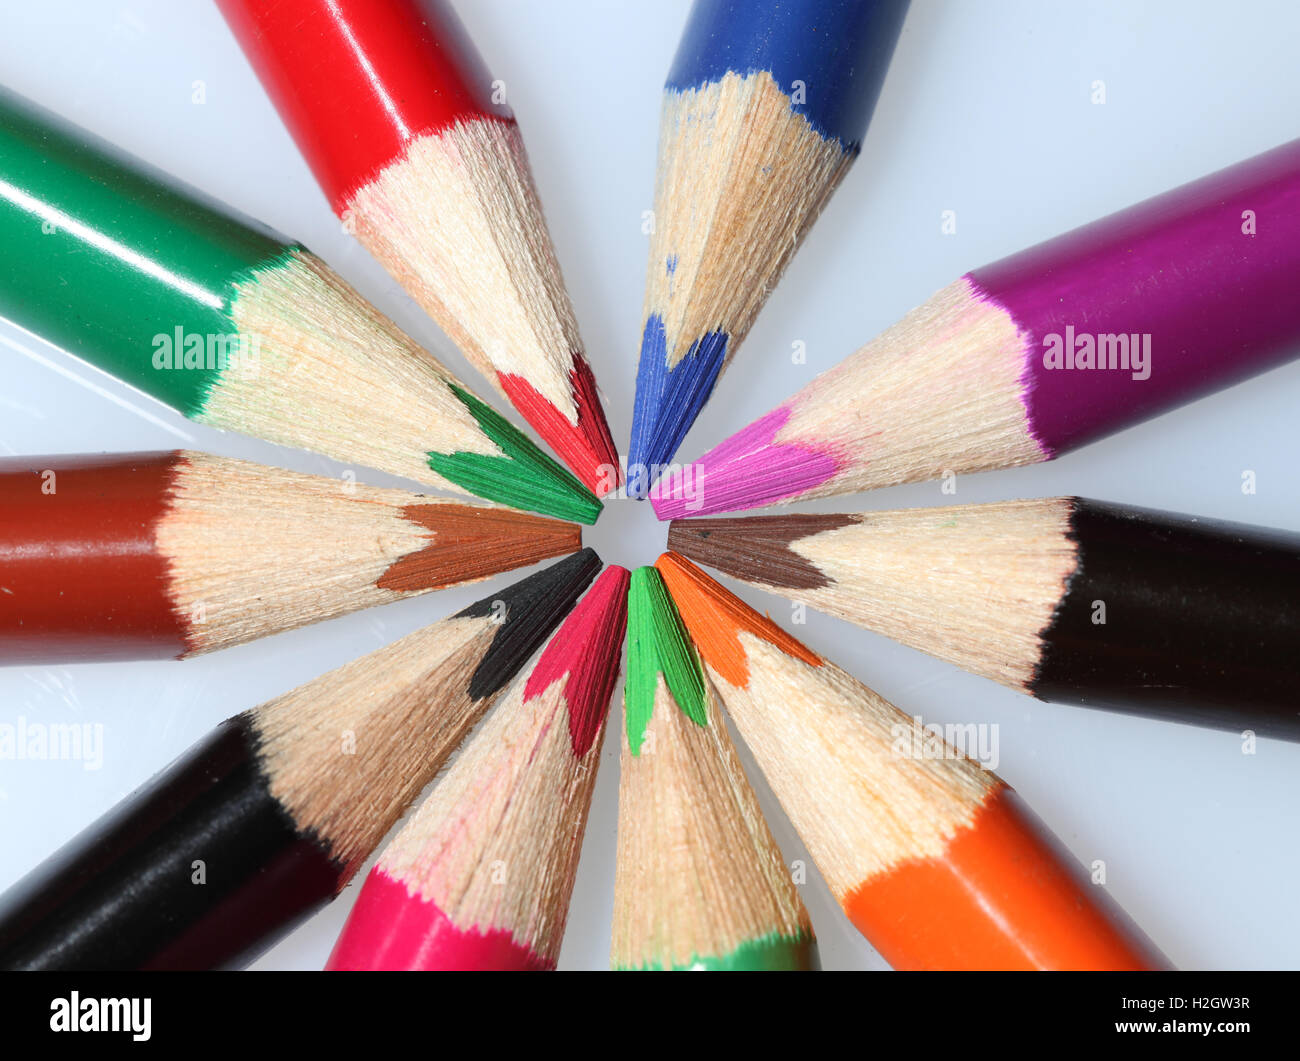 Colorful crayons in a circle, close-up Stock Photo